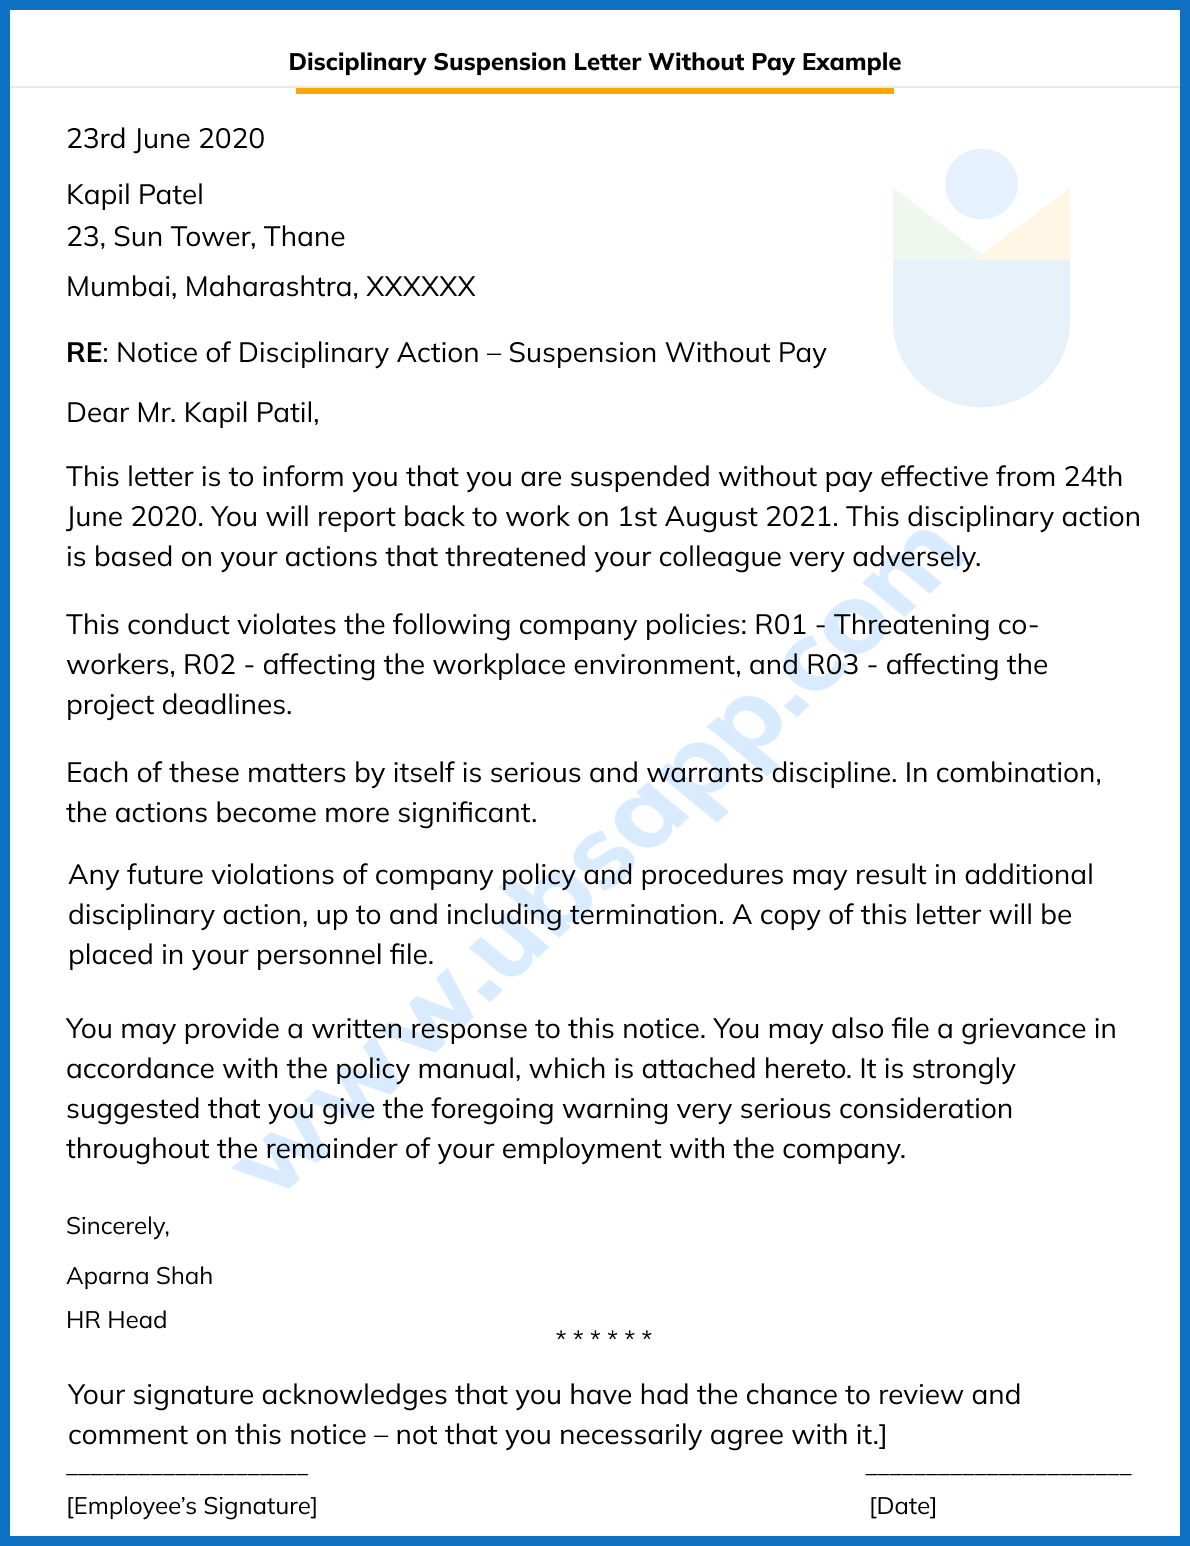 Disciplinary Suspension Letter Without Pay Example